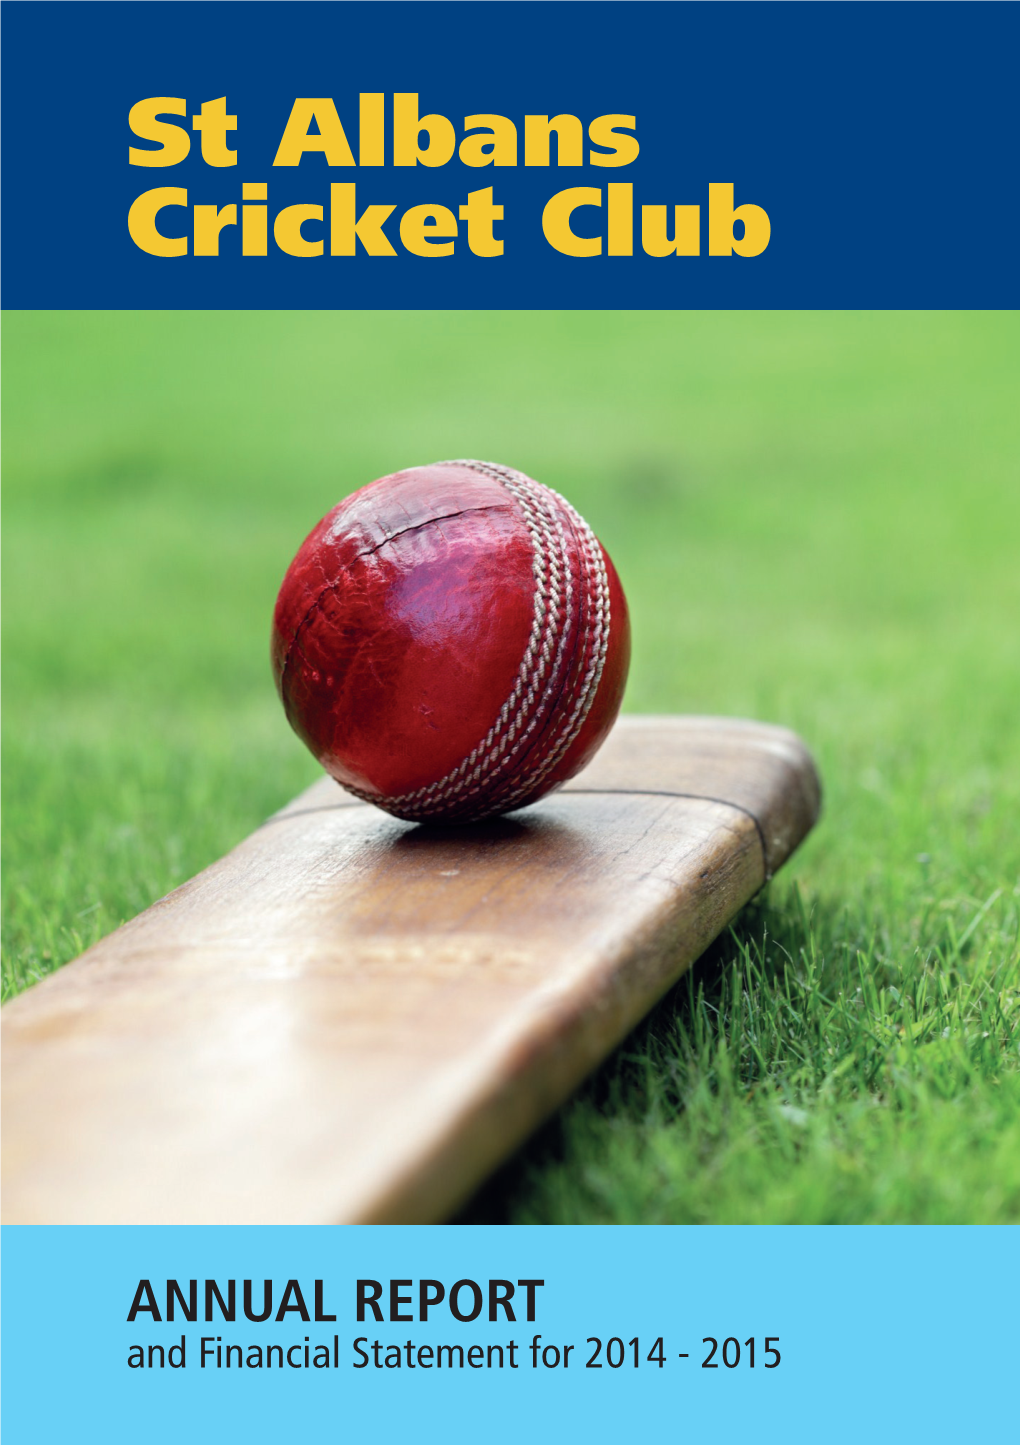 ANNUAL REPORT and Financial Statement for 2014 - 2015 St Albans Cricket Club Thanks and Acknowledges the Various Image Suppliers